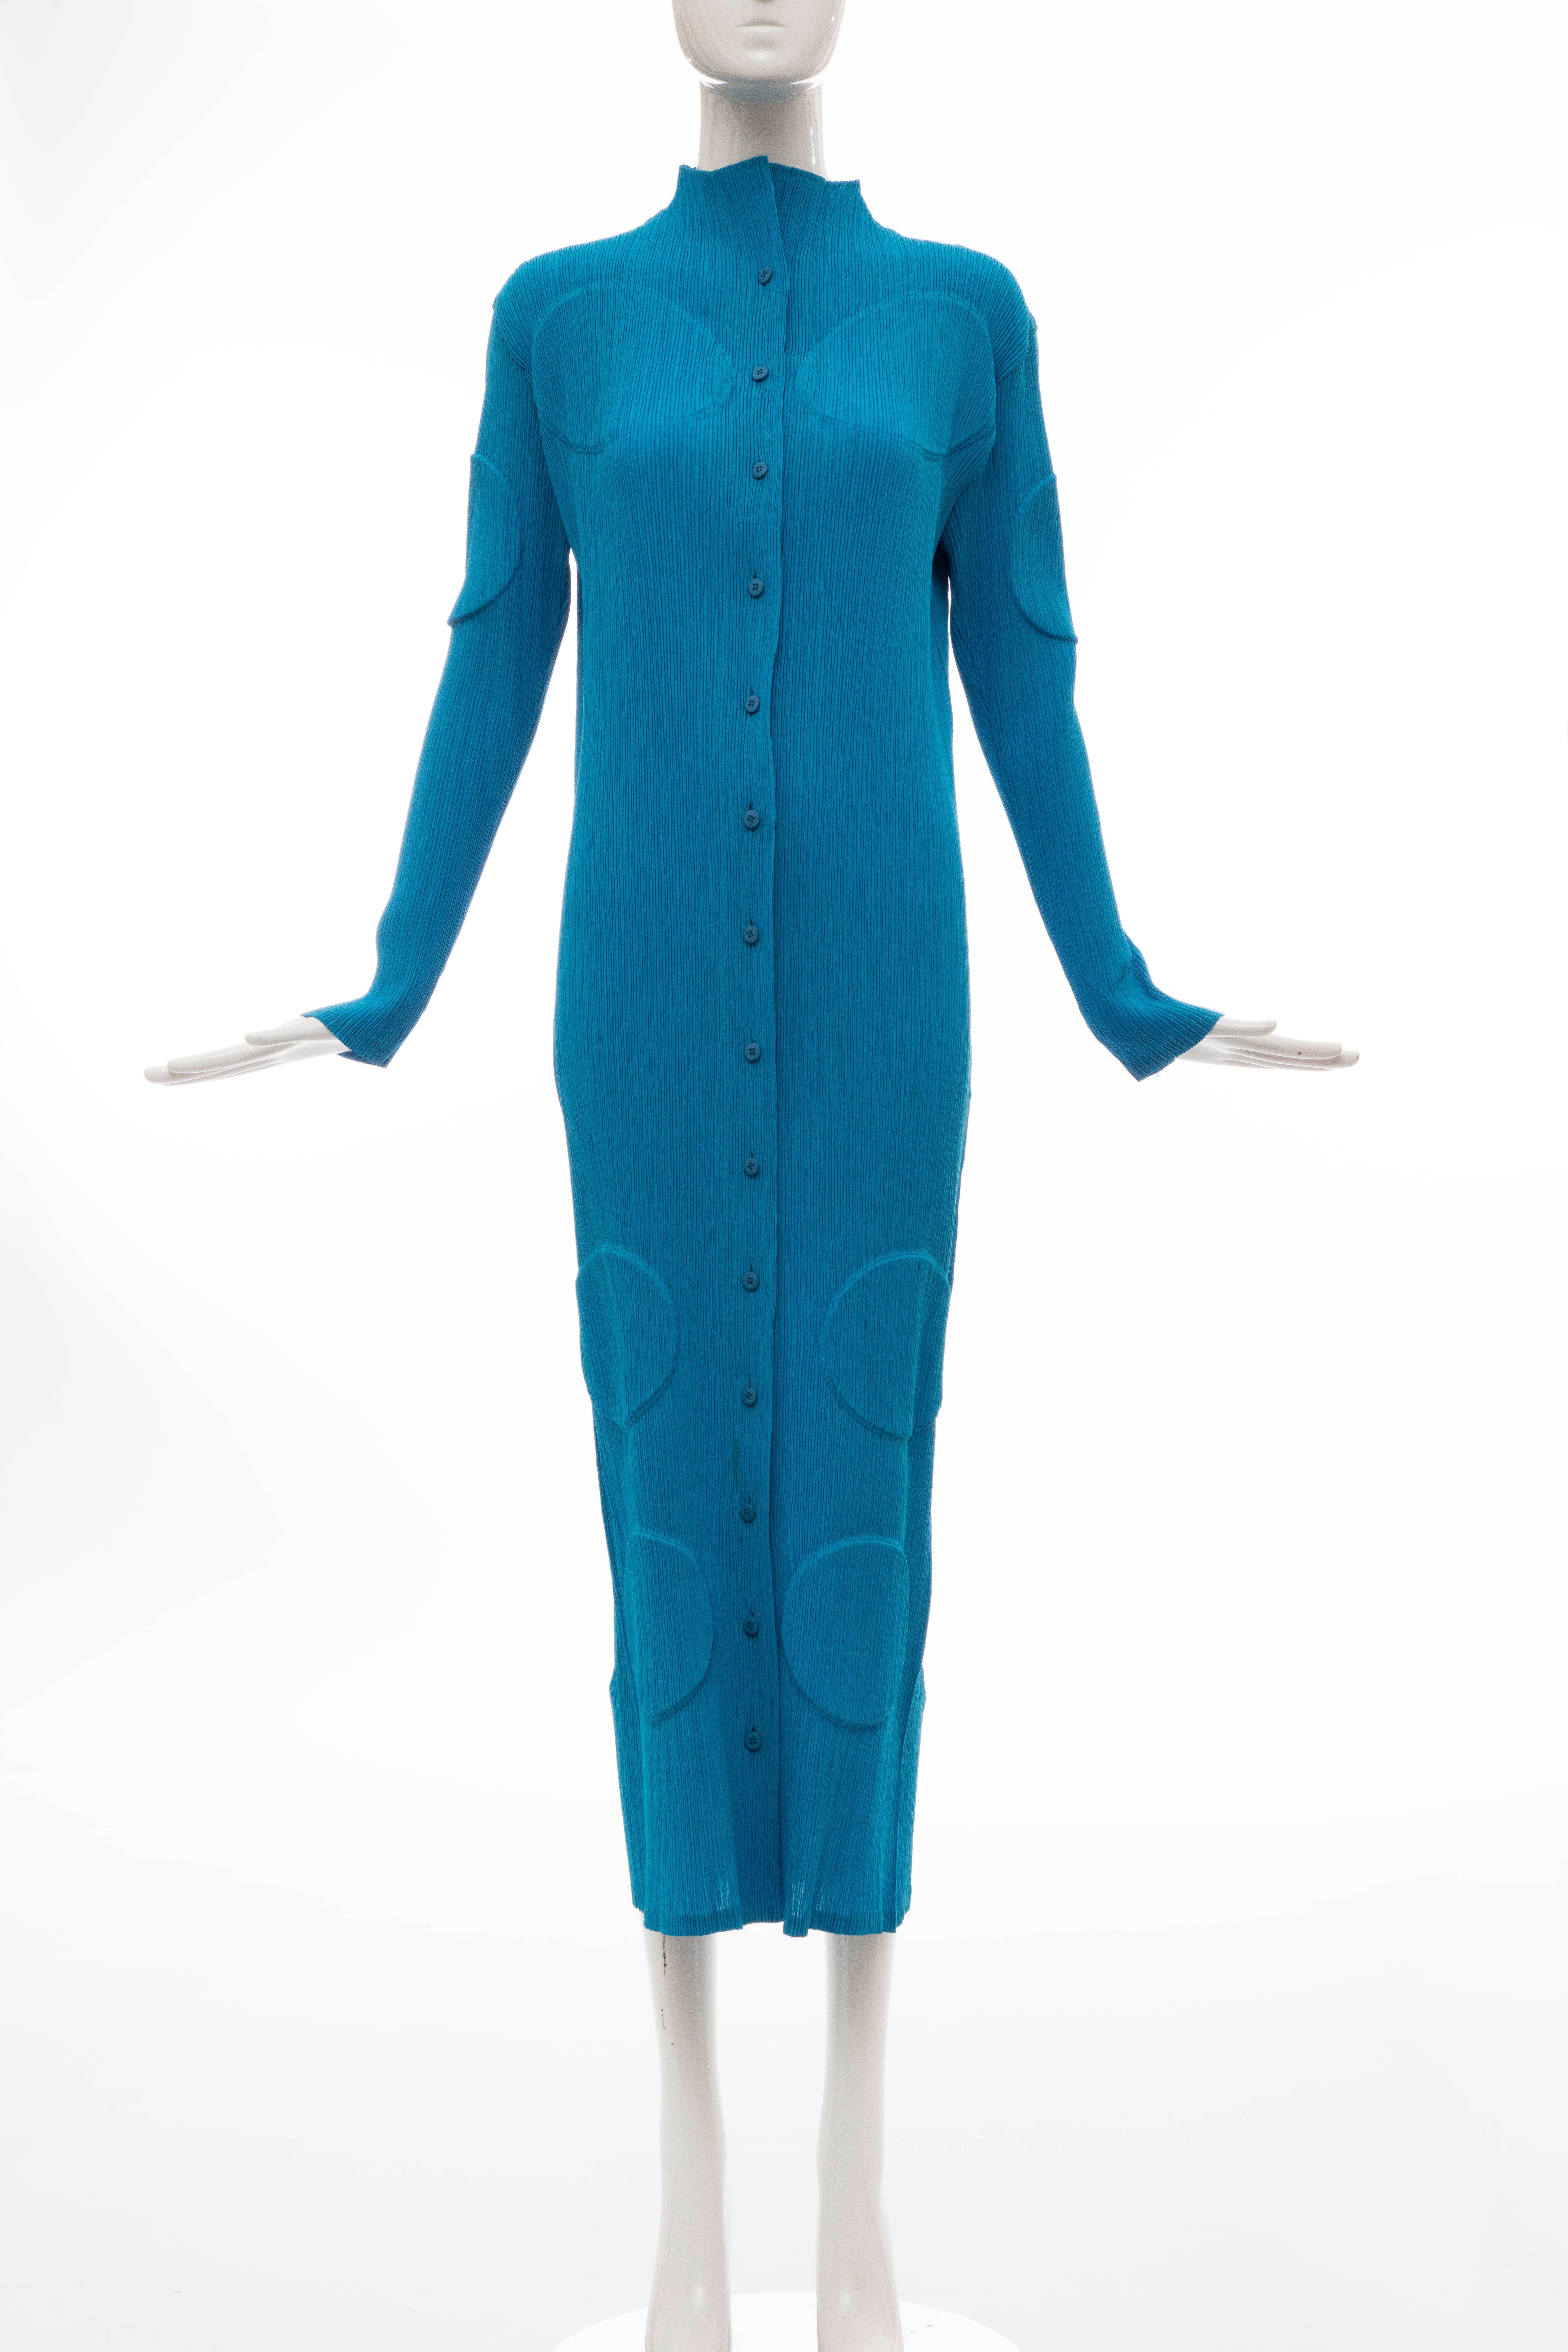 Blue Issey Miyake Turquoise Long Button Front Cardigan, Circa 1990s For Sale